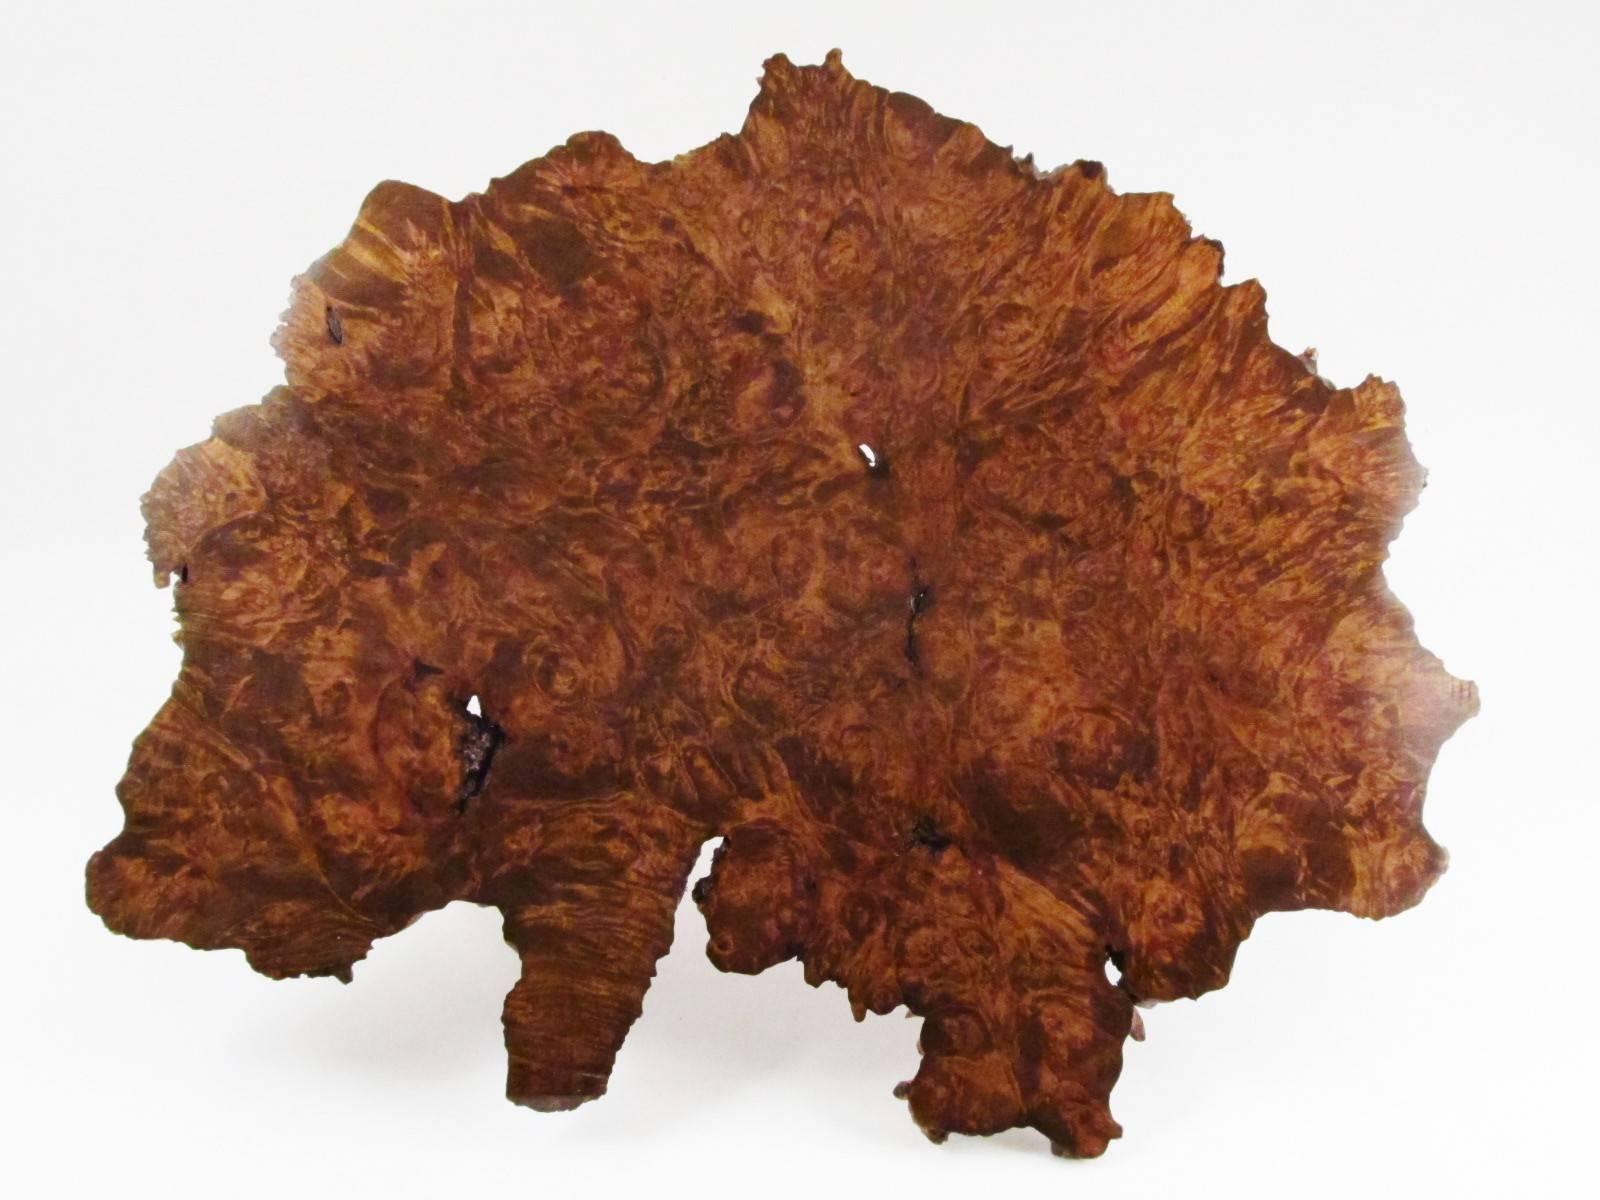 This is a very unusual piece of Carpathian elm burl. Burl pieces like this are usually sliced up into veneer, because it is rare to find pieces of any scale, and it's too valuable as veneers to do anything else with it. 

I recently purchased this